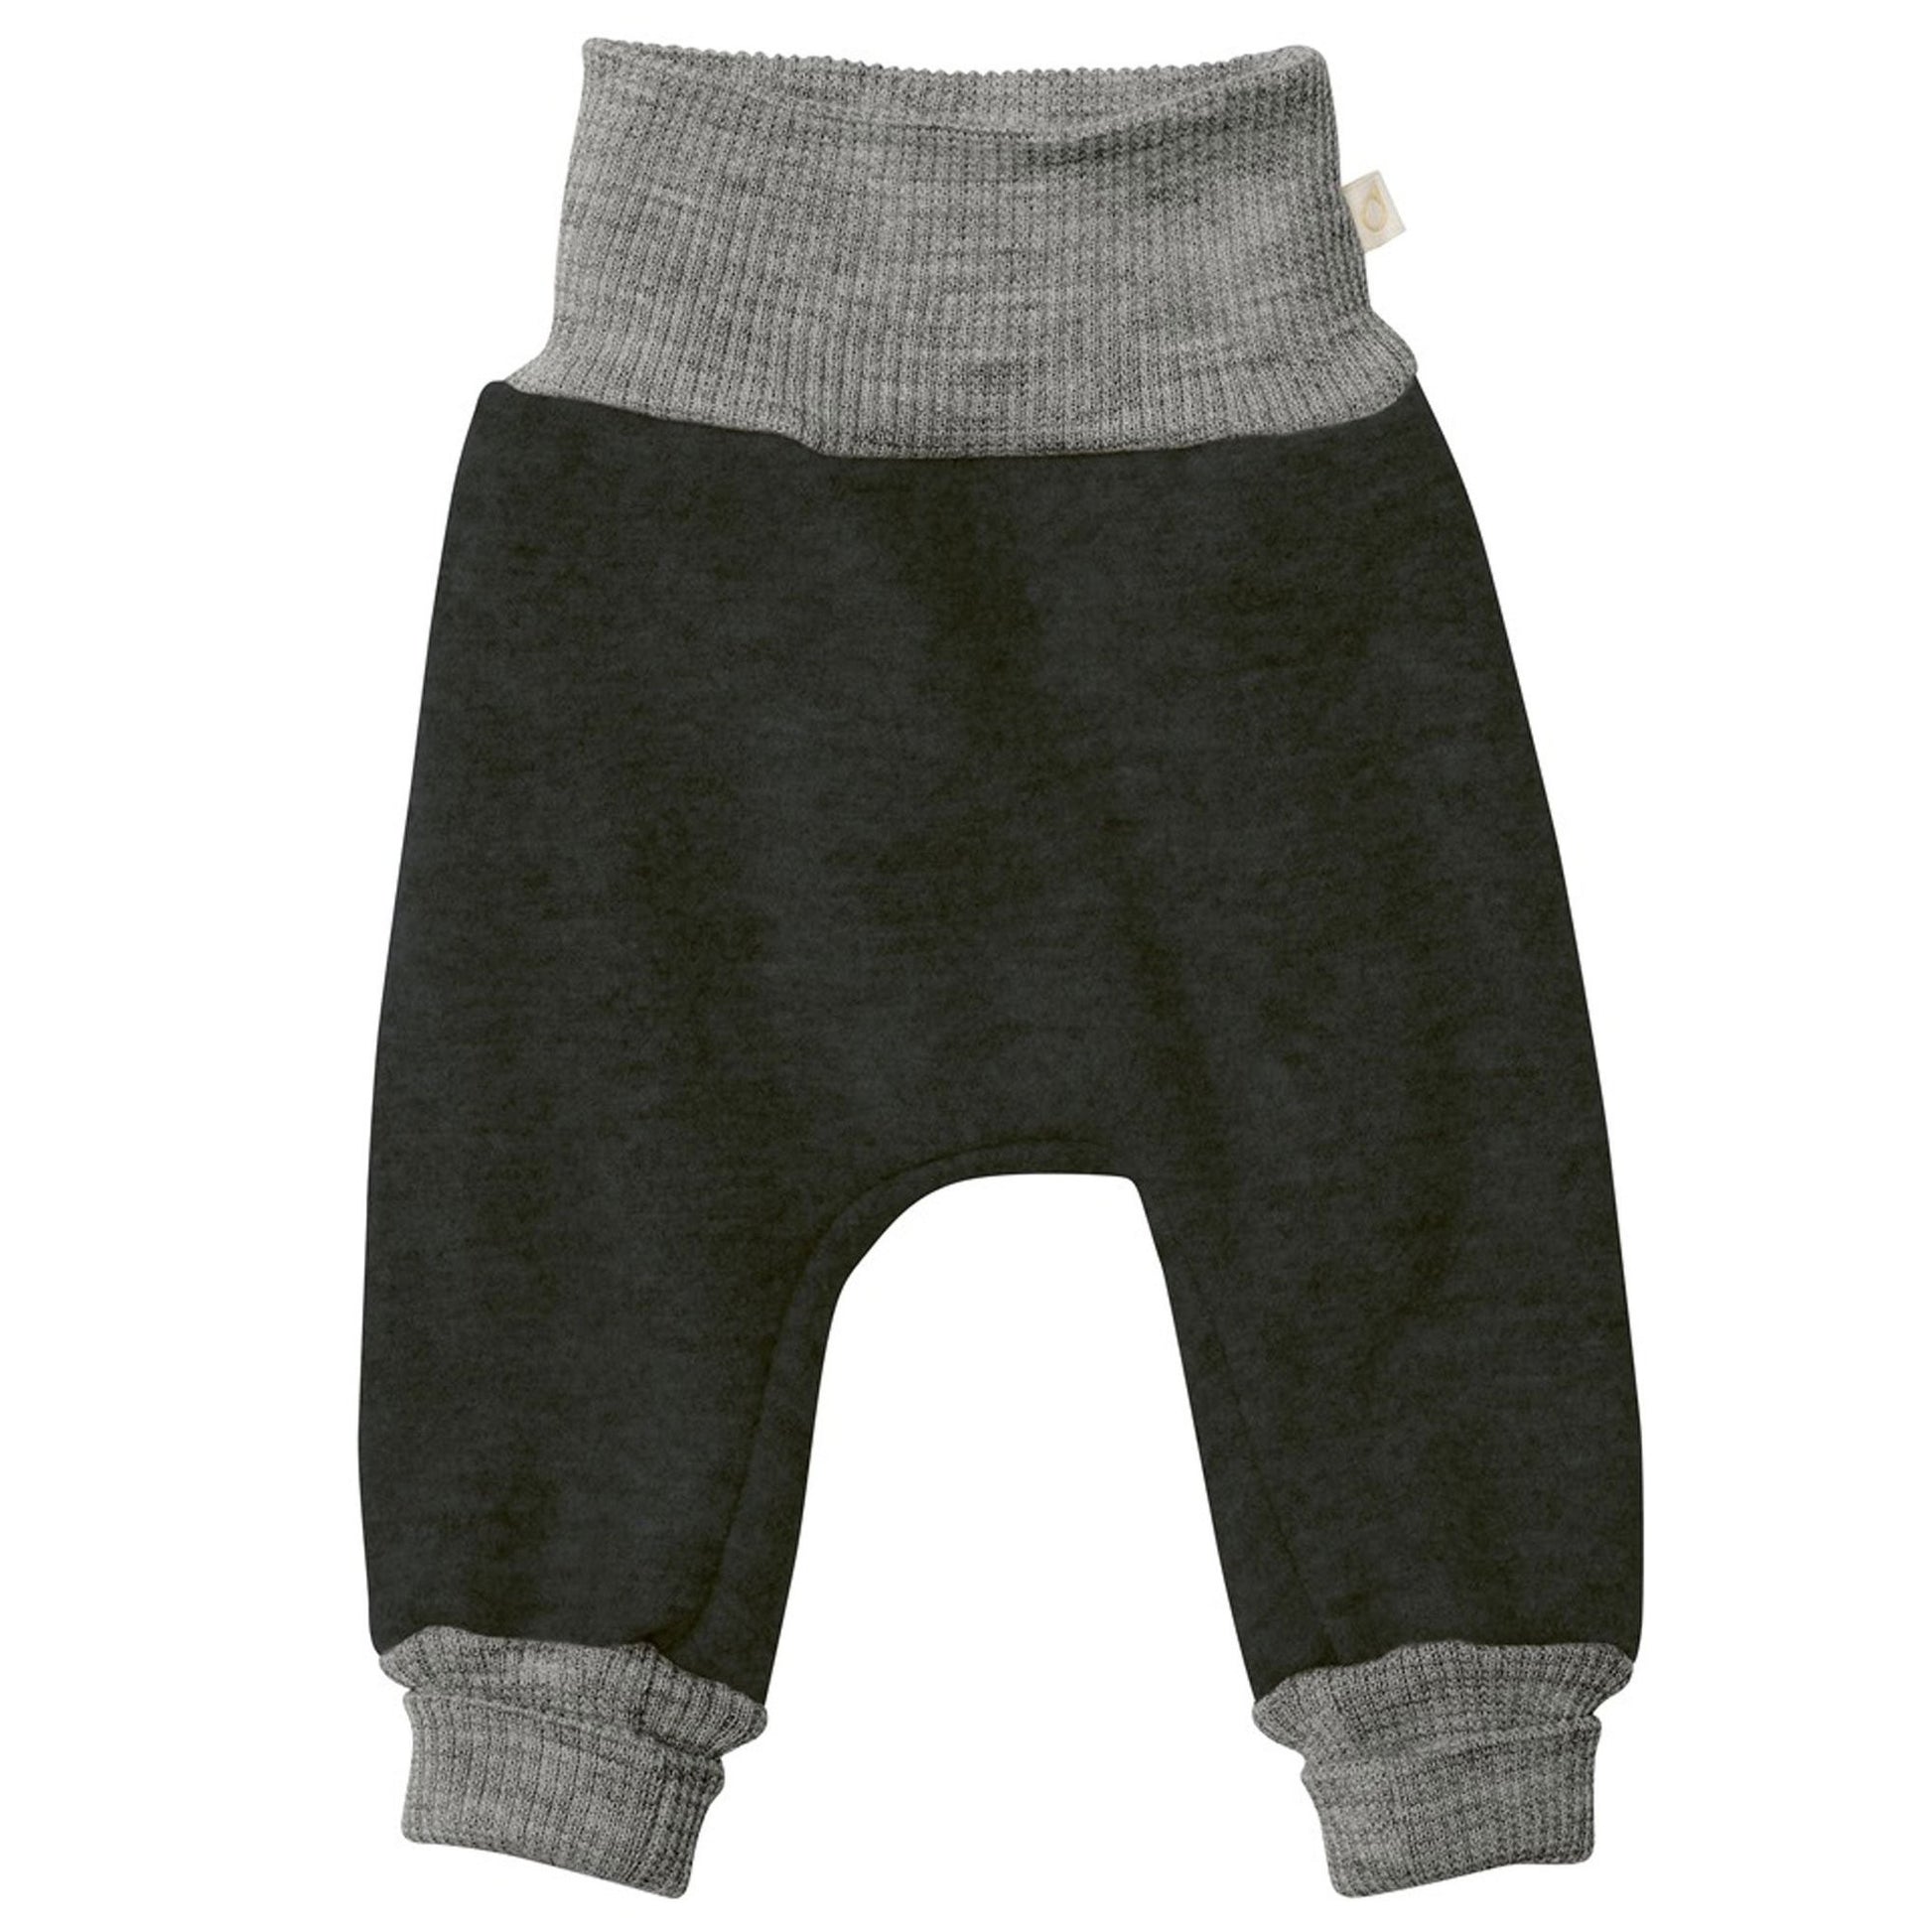 Bloomers Disana lână organica boiled wool - Anthracite